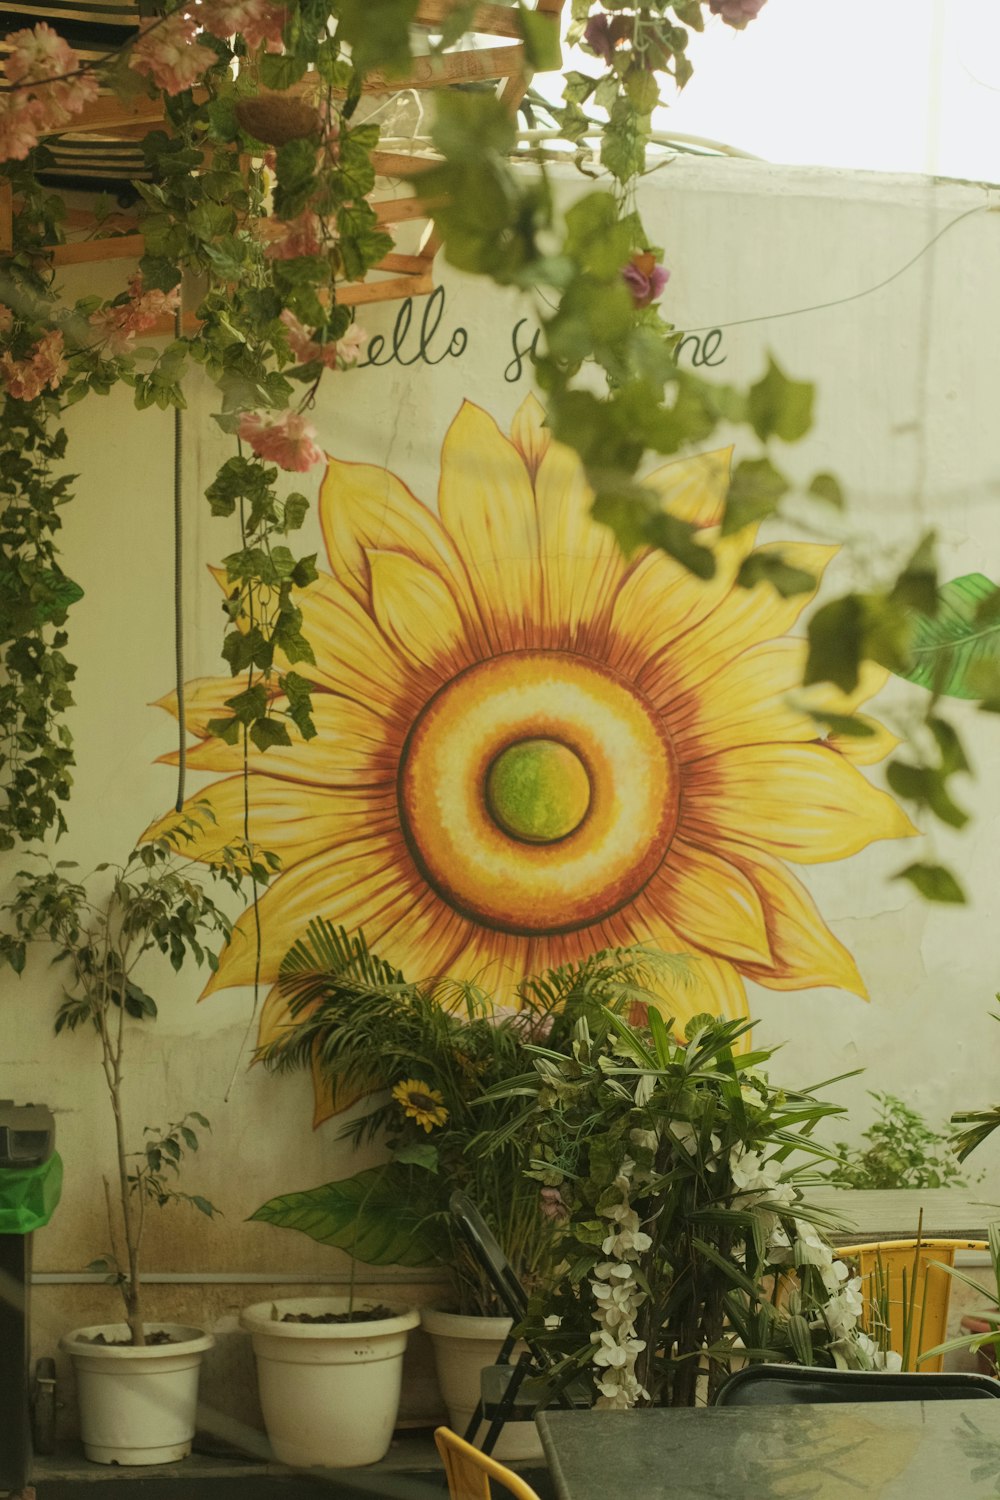 a sunflower painted on the side of a building